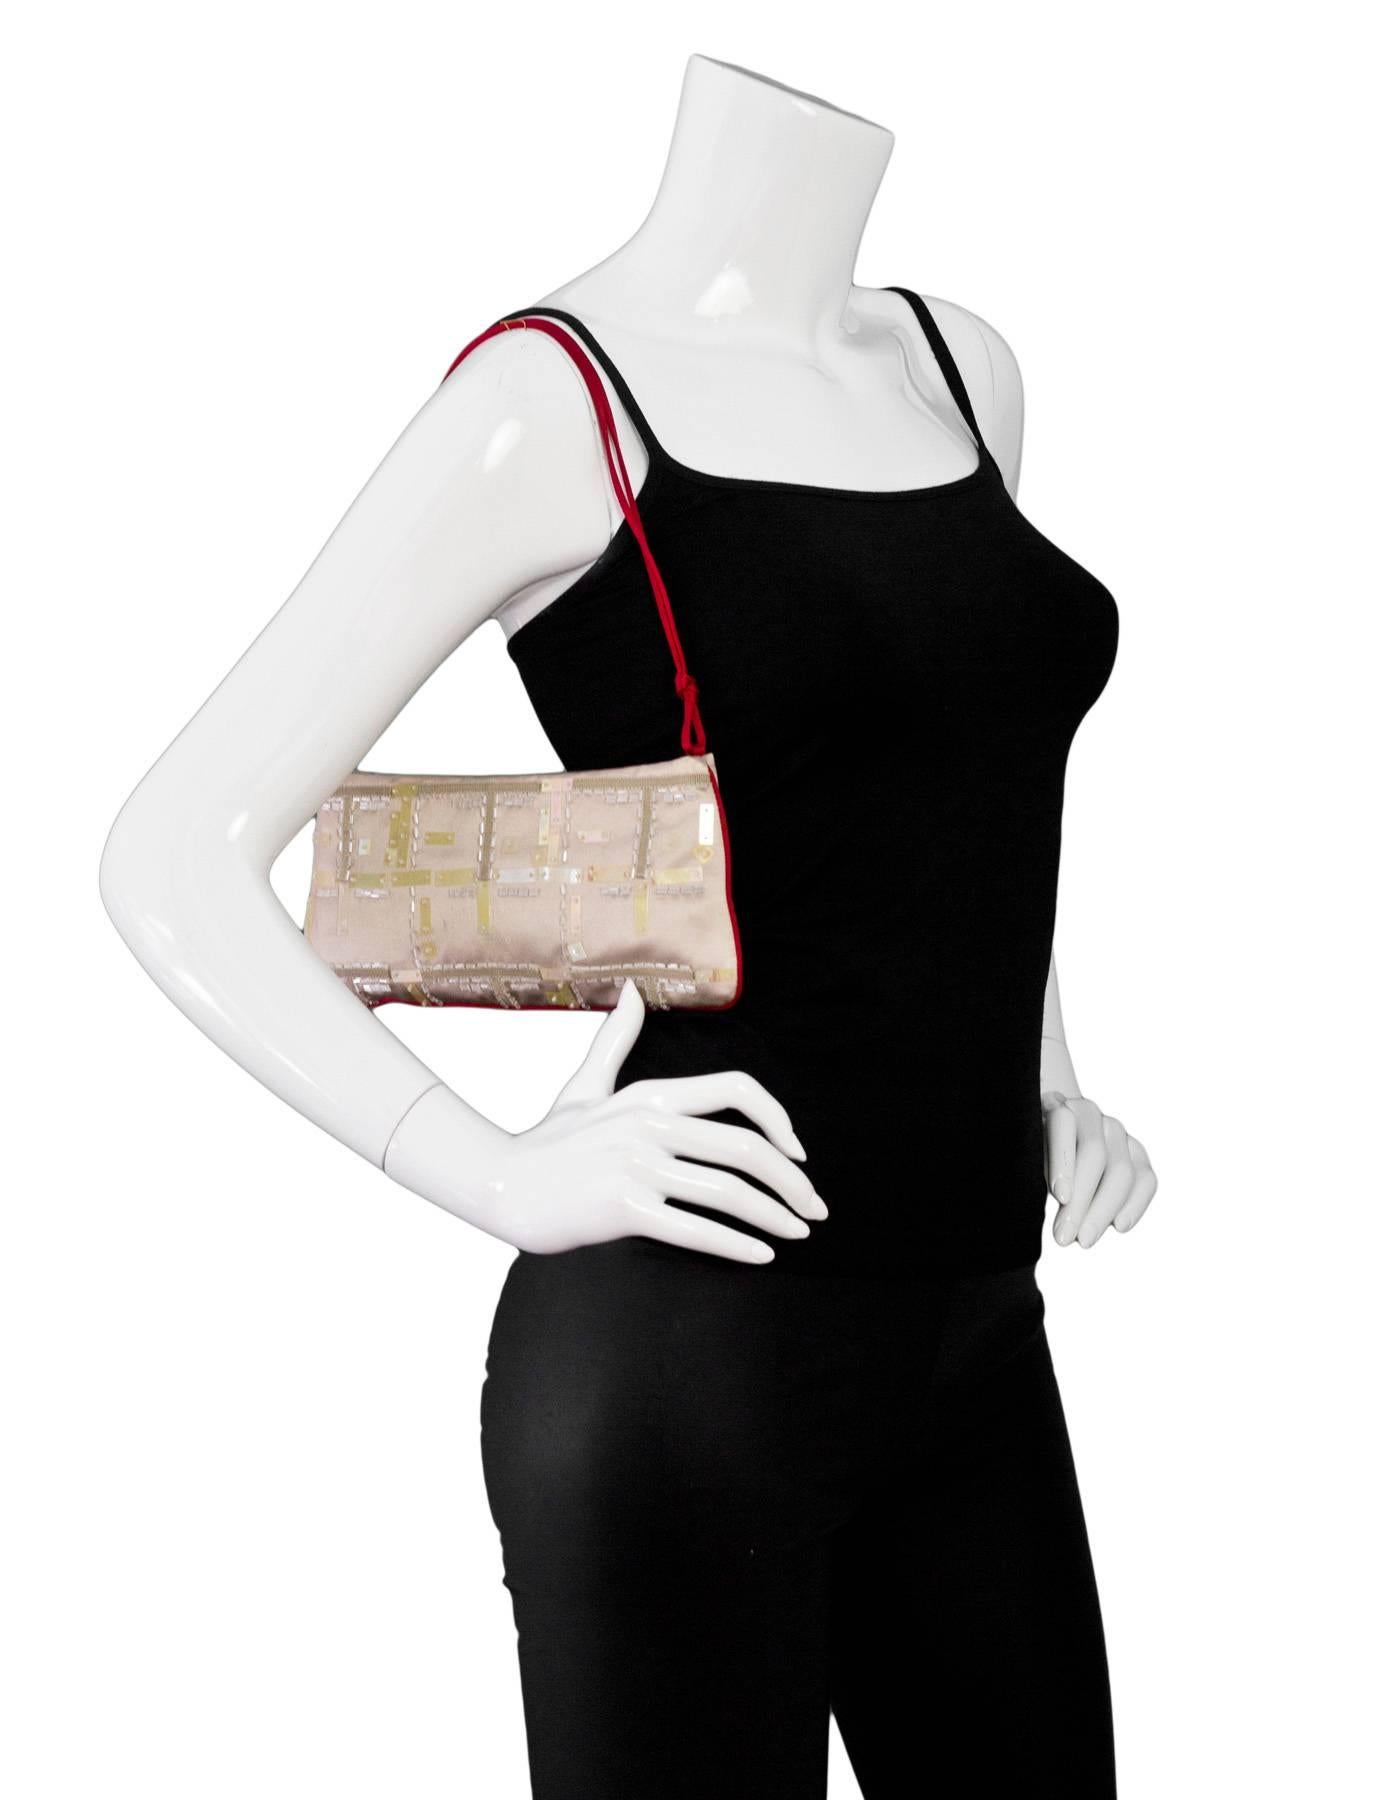 Prada Champagne & Red Satin Beaded Pochette

Made In: Italy
Color: Champagne, red
Materials: Satin
Lining: Red satin
Closure/Opening: Magnetic closure
Exterior Pockets: None
Interior Pockets: One wall pocket
Overall Condition: Excellent